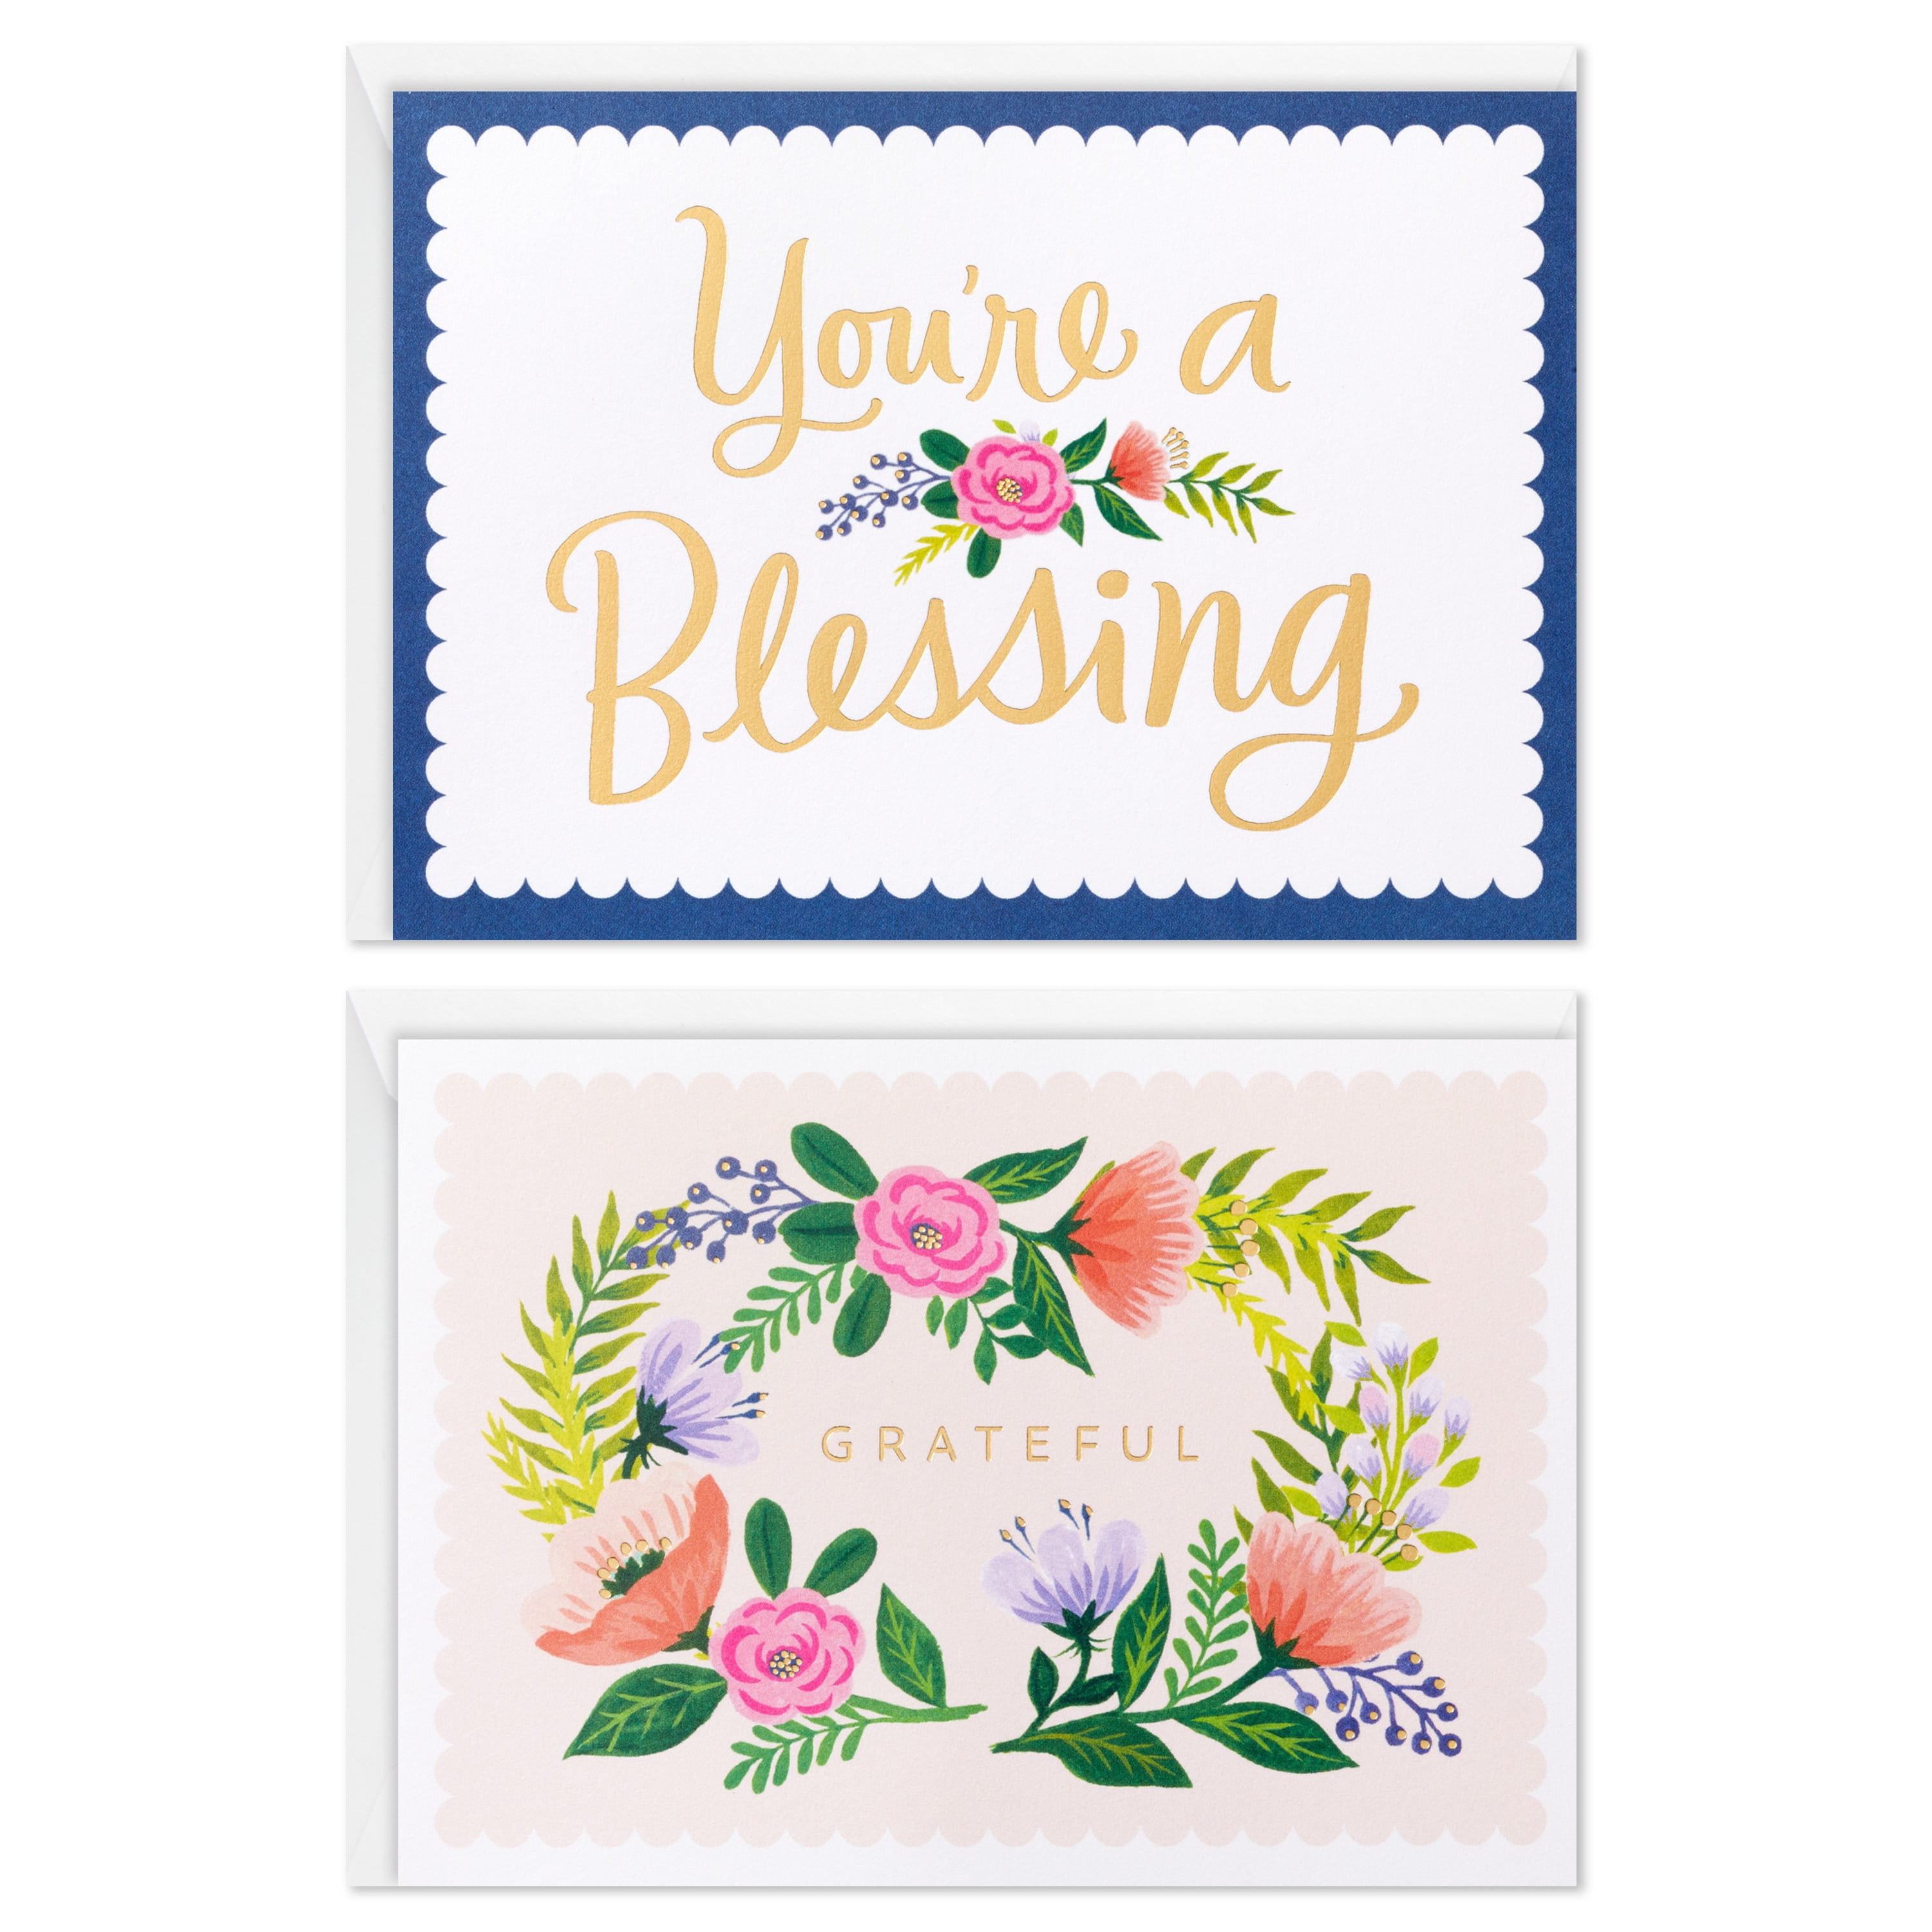 Hallmark Blank Thank-You Notes, Graceful Florals 50 ct.